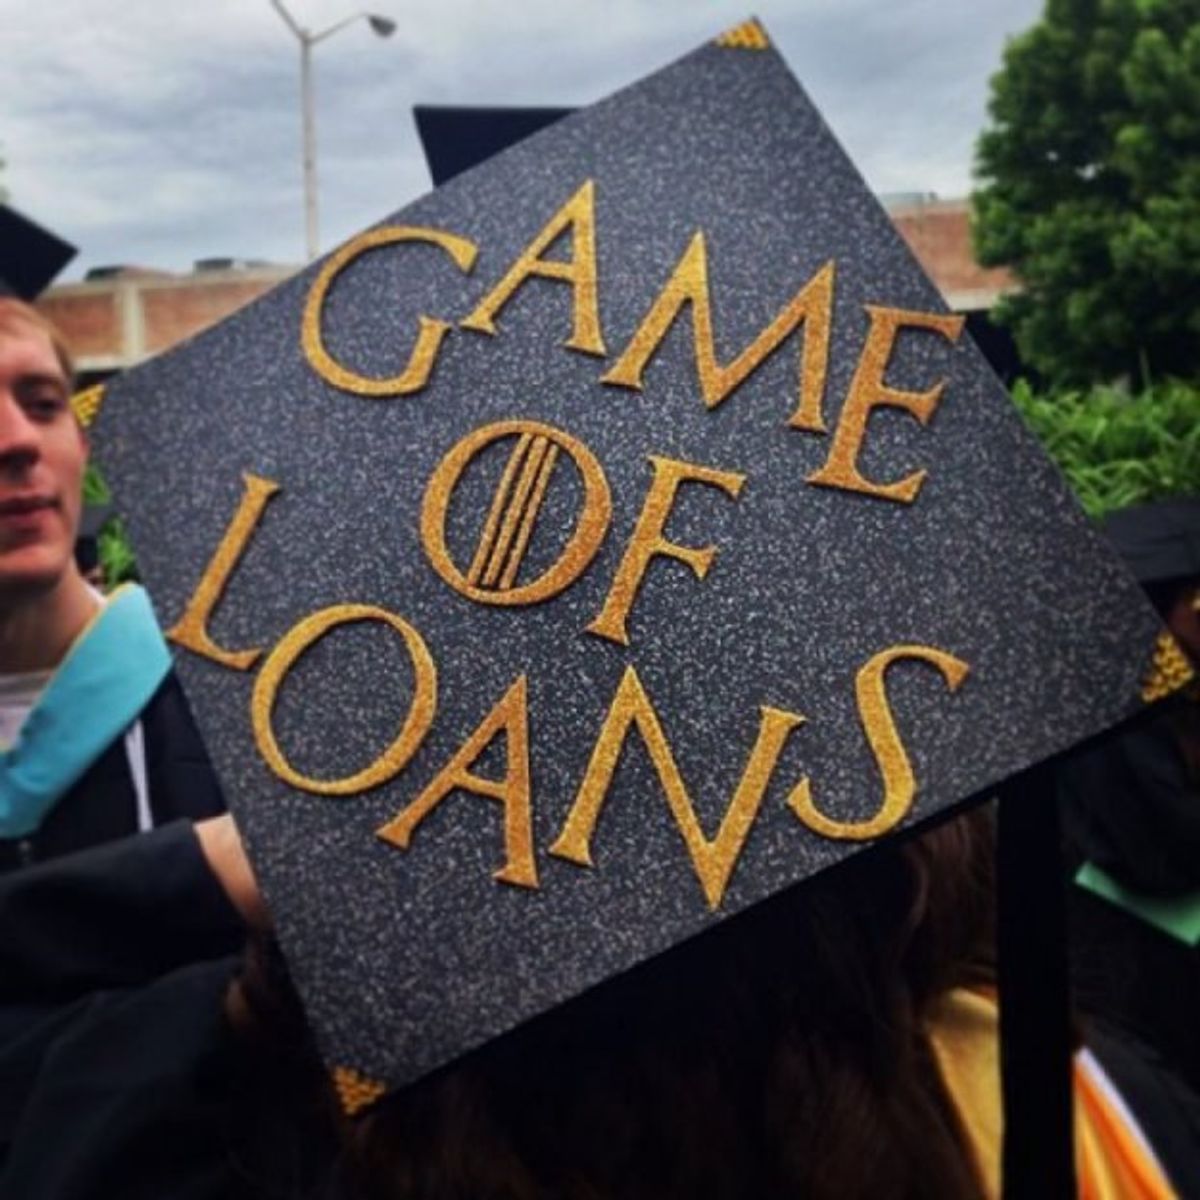 Millennials Are Drowning In a Sea of Student Debt